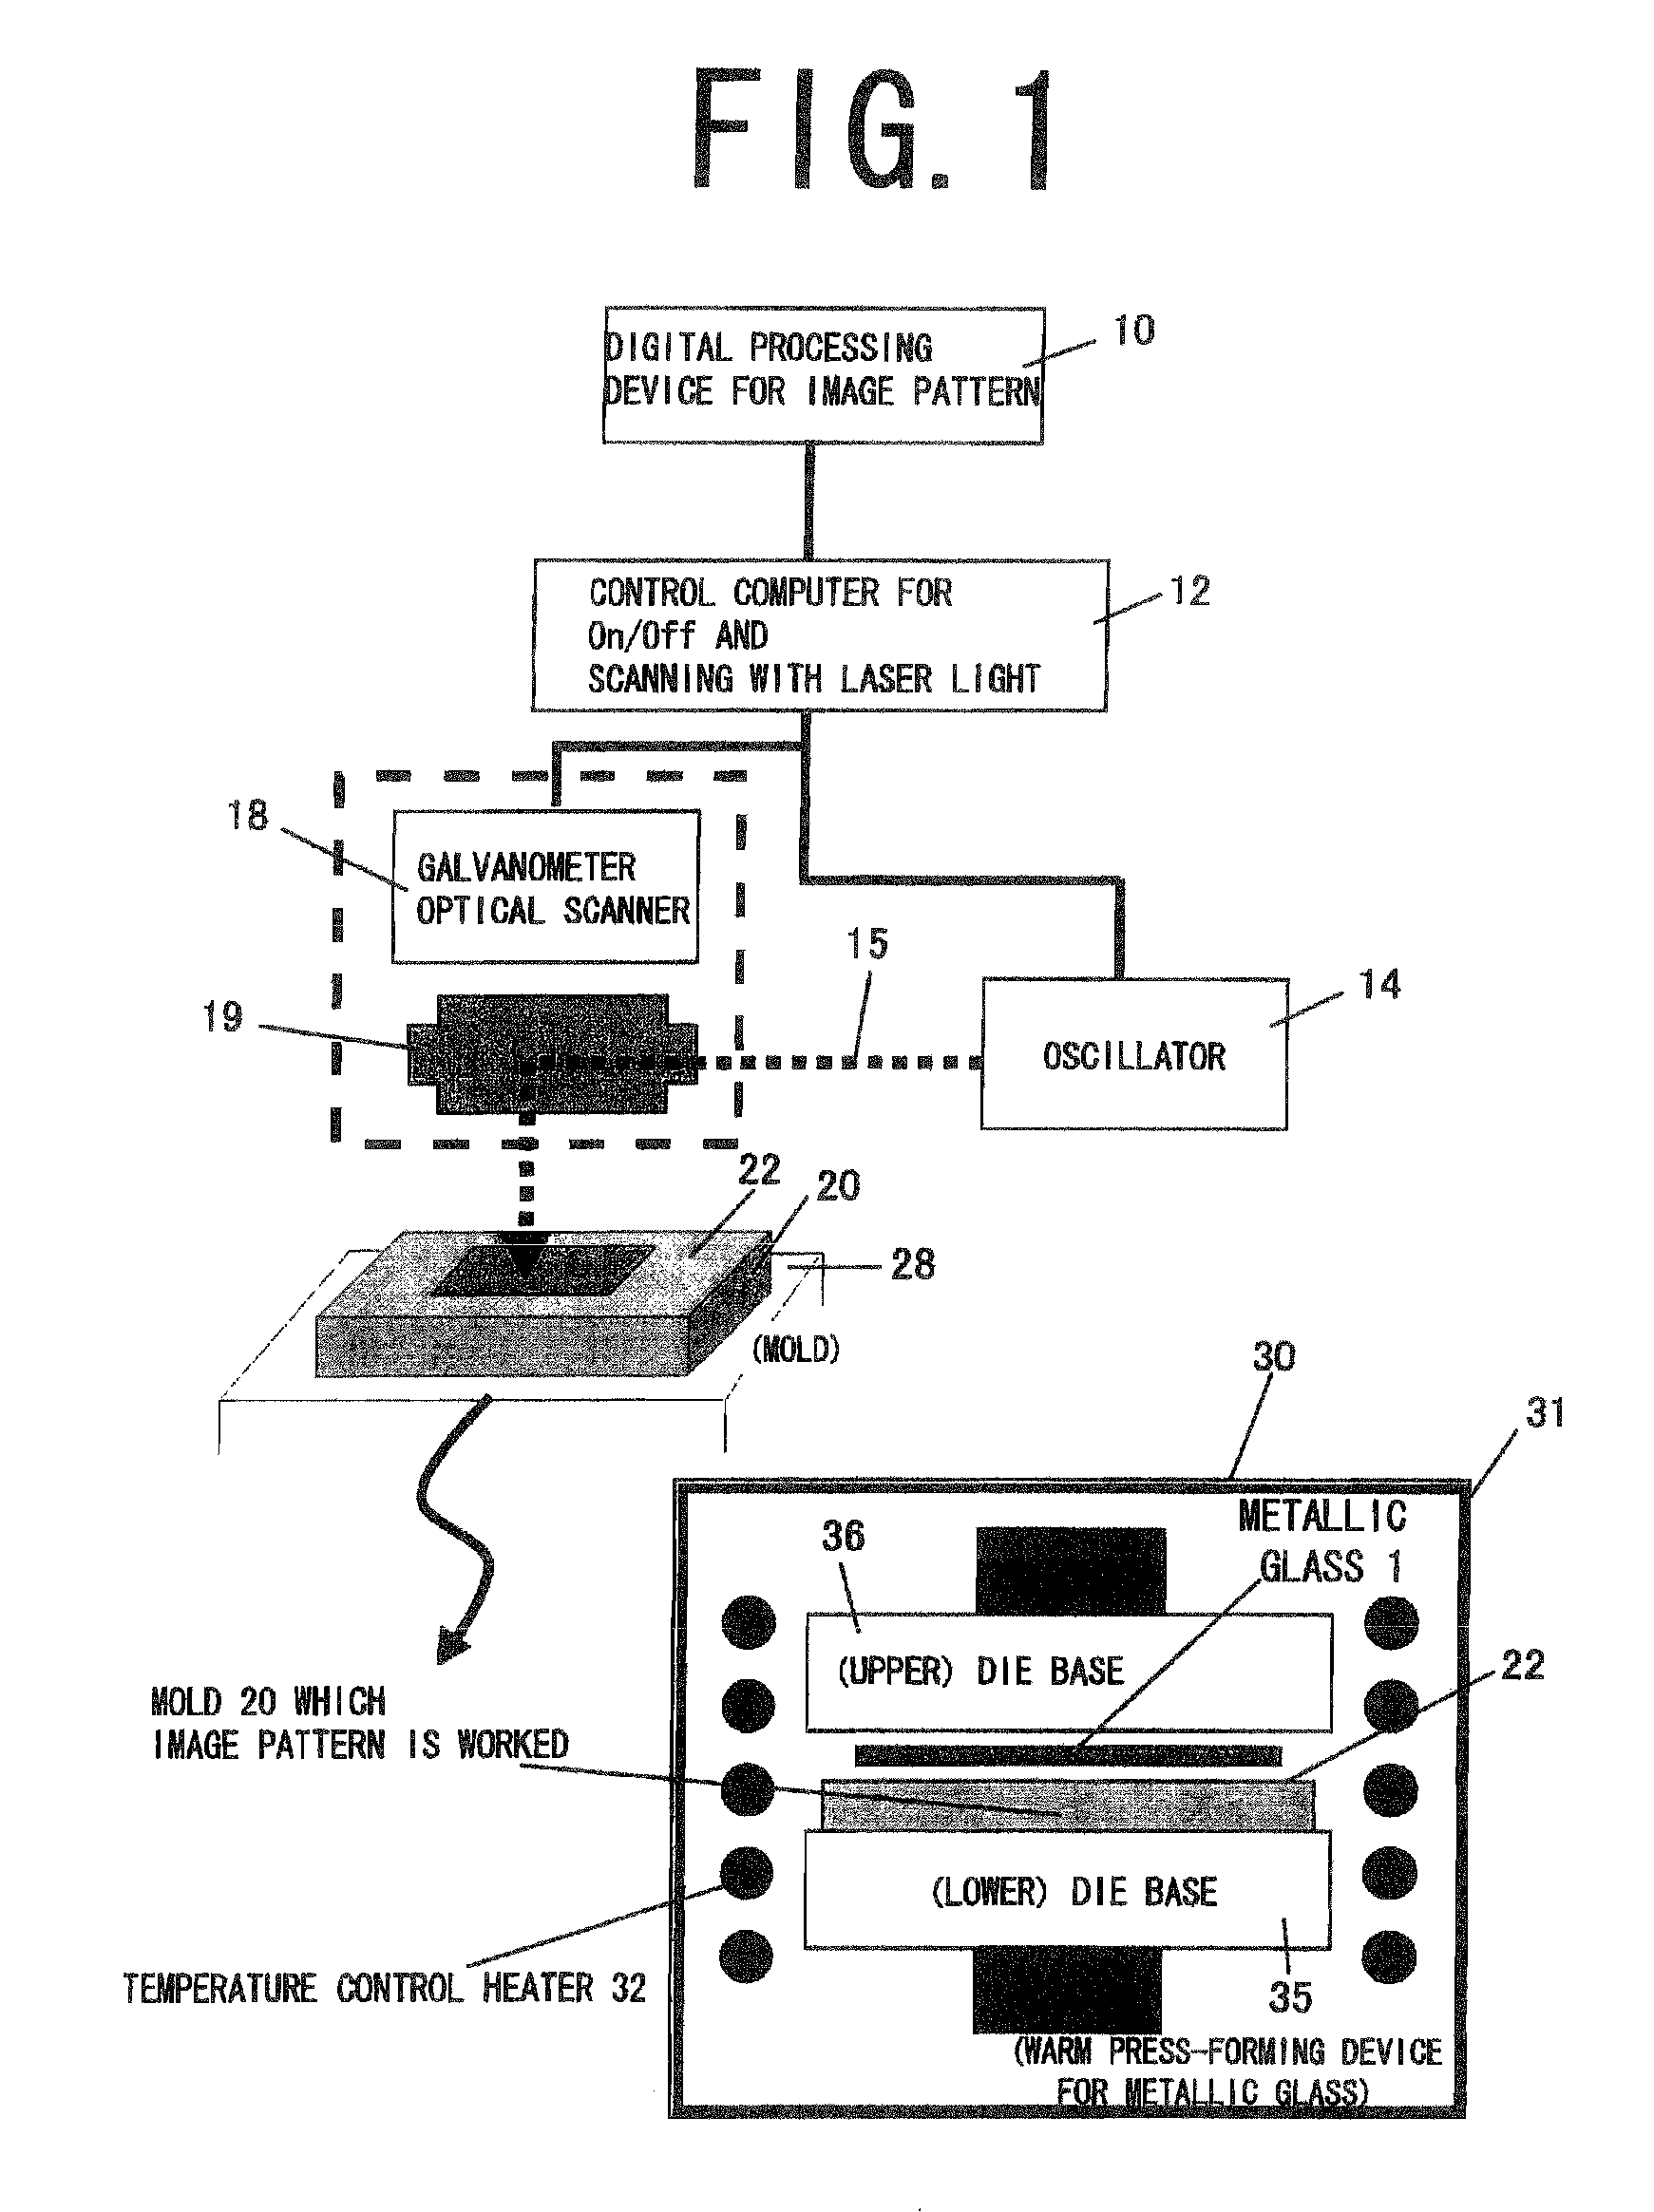 Method for forming image pattern on surface of metallic glass member, apparatus for forming image pattern, and metallic glass member having image pattern on its surface